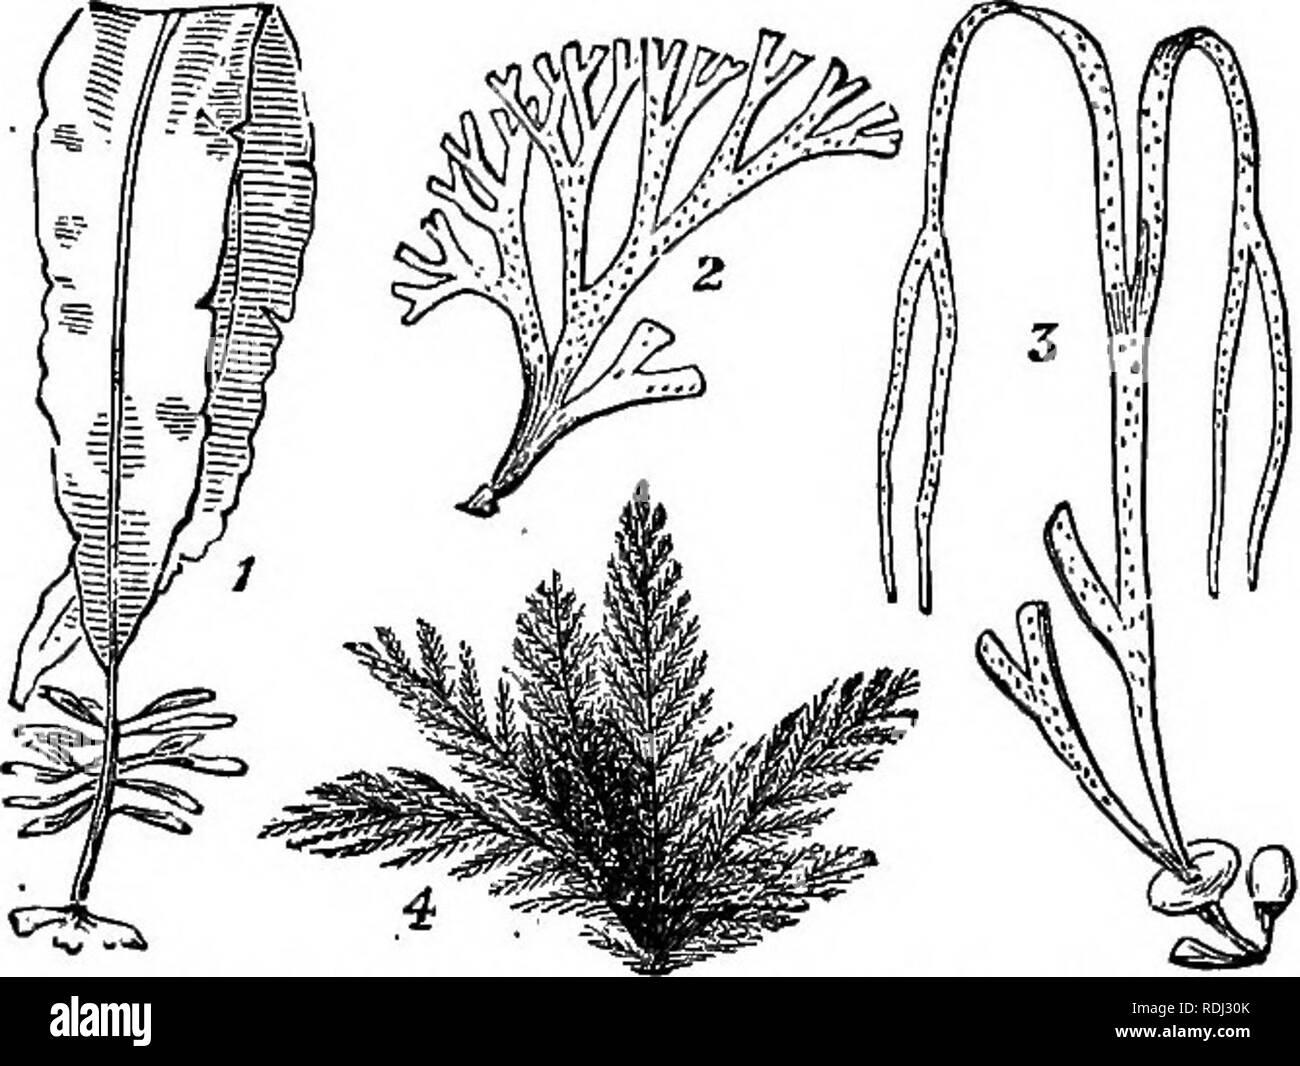 . Botany for academies and colleges: consisting of plant development and structure from seaweed to clematis. Botany; 1889. THALLOGENS FINISHED. 27. Frond (L. frons, frondis, leaf). The terms thallus and frond are usually restricted to those cellular parts which are spreading and leafy in appear- ance ; they are al- ways distinguish- able from the true leaf, however; for they bear the floral organs, whereas the true leaf very rarely bears them. â ,â,â,,,, â . , , â ââ , , . ,â¢' , , Fia. 16.â1, Badderlocks, Alana escvUnta. 2, Dictyoia And they are al- dichotoma. 3, Sea-thong, IJimanihalea lorea Stock Photo